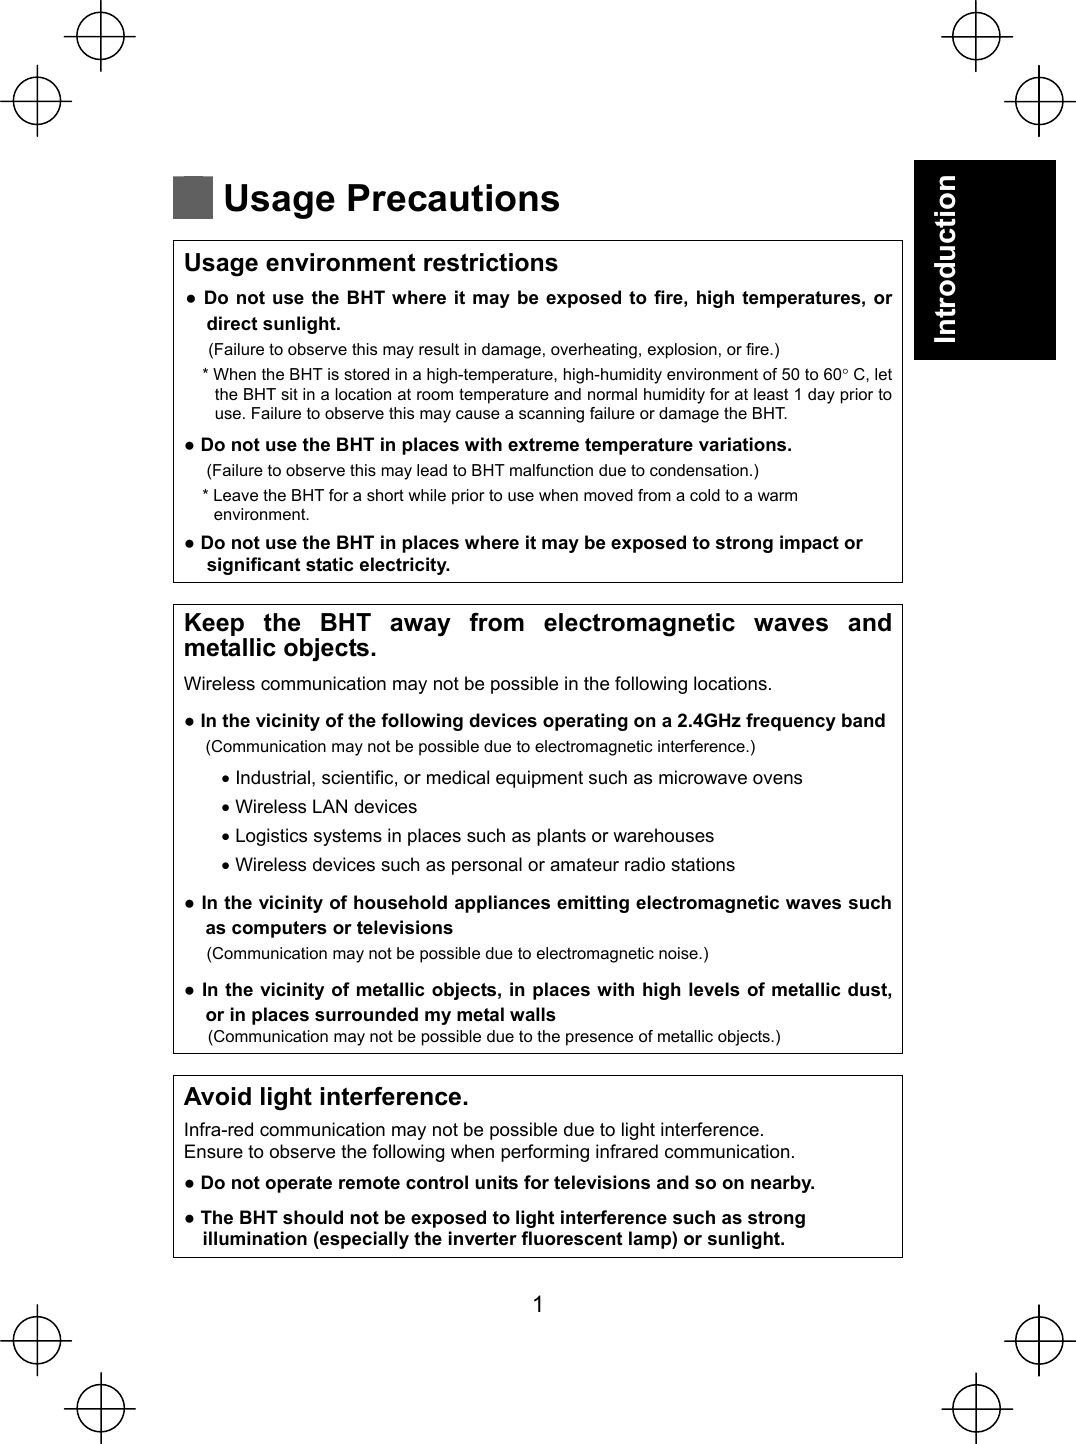  1 Introduction   Usage Precautions   Usage environment restrictions Ɣ Do not use the BHT where it may be exposed to fire, high temperatures, or direct sunlight. (Failure to observe this may result in damage, overheating, explosion, or fire.) * When the BHT is stored in a high-temperature, high-humidity environment of 50 to 60q C, let the BHT sit in a location at room temperature and normal humidity for at least 1 day prior to use. Failure to observe this may cause a scanning failure or damage the BHT.   Ɣ Do not use the BHT in places with extreme temperature variations. (Failure to observe this may lead to BHT malfunction due to condensation.) * Leave the BHT for a short while prior to use when moved from a cold to a warm   environment. Ɣ Do not use the BHT in places where it may be exposed to strong impact or   significant static electricity.   Keep the BHT away from electromagnetic waves and metallic objects. Wireless communication may not be possible in the following locations. Ɣ In the vicinity of the following devices operating on a 2.4GHz frequency band (Communication may not be possible due to electromagnetic interference.) x Industrial, scientific, or medical equipment such as microwave ovens x Wireless LAN devices x Logistics systems in places such as plants or warehouses x Wireless devices such as personal or amateur radio stations Ɣ In the vicinity of household appliances emitting electromagnetic waves such as computers or televisions (Communication may not be possible due to electromagnetic noise.) Ɣ In the vicinity of metallic objects, in places with high levels of metallic dust, or in places surrounded my metal walls (Communication may not be possible due to the presence of metallic objects.)   Avoid light interference. Infra-red communication may not be possible due to light interference. Ensure to observe the following when performing infrared communication. Ɣ Do not operate remote control units for televisions and so on nearby. Ɣ The BHT should not be exposed to light interference such as strong   illumination (especially the inverter fluorescent lamp) or sunlight.  